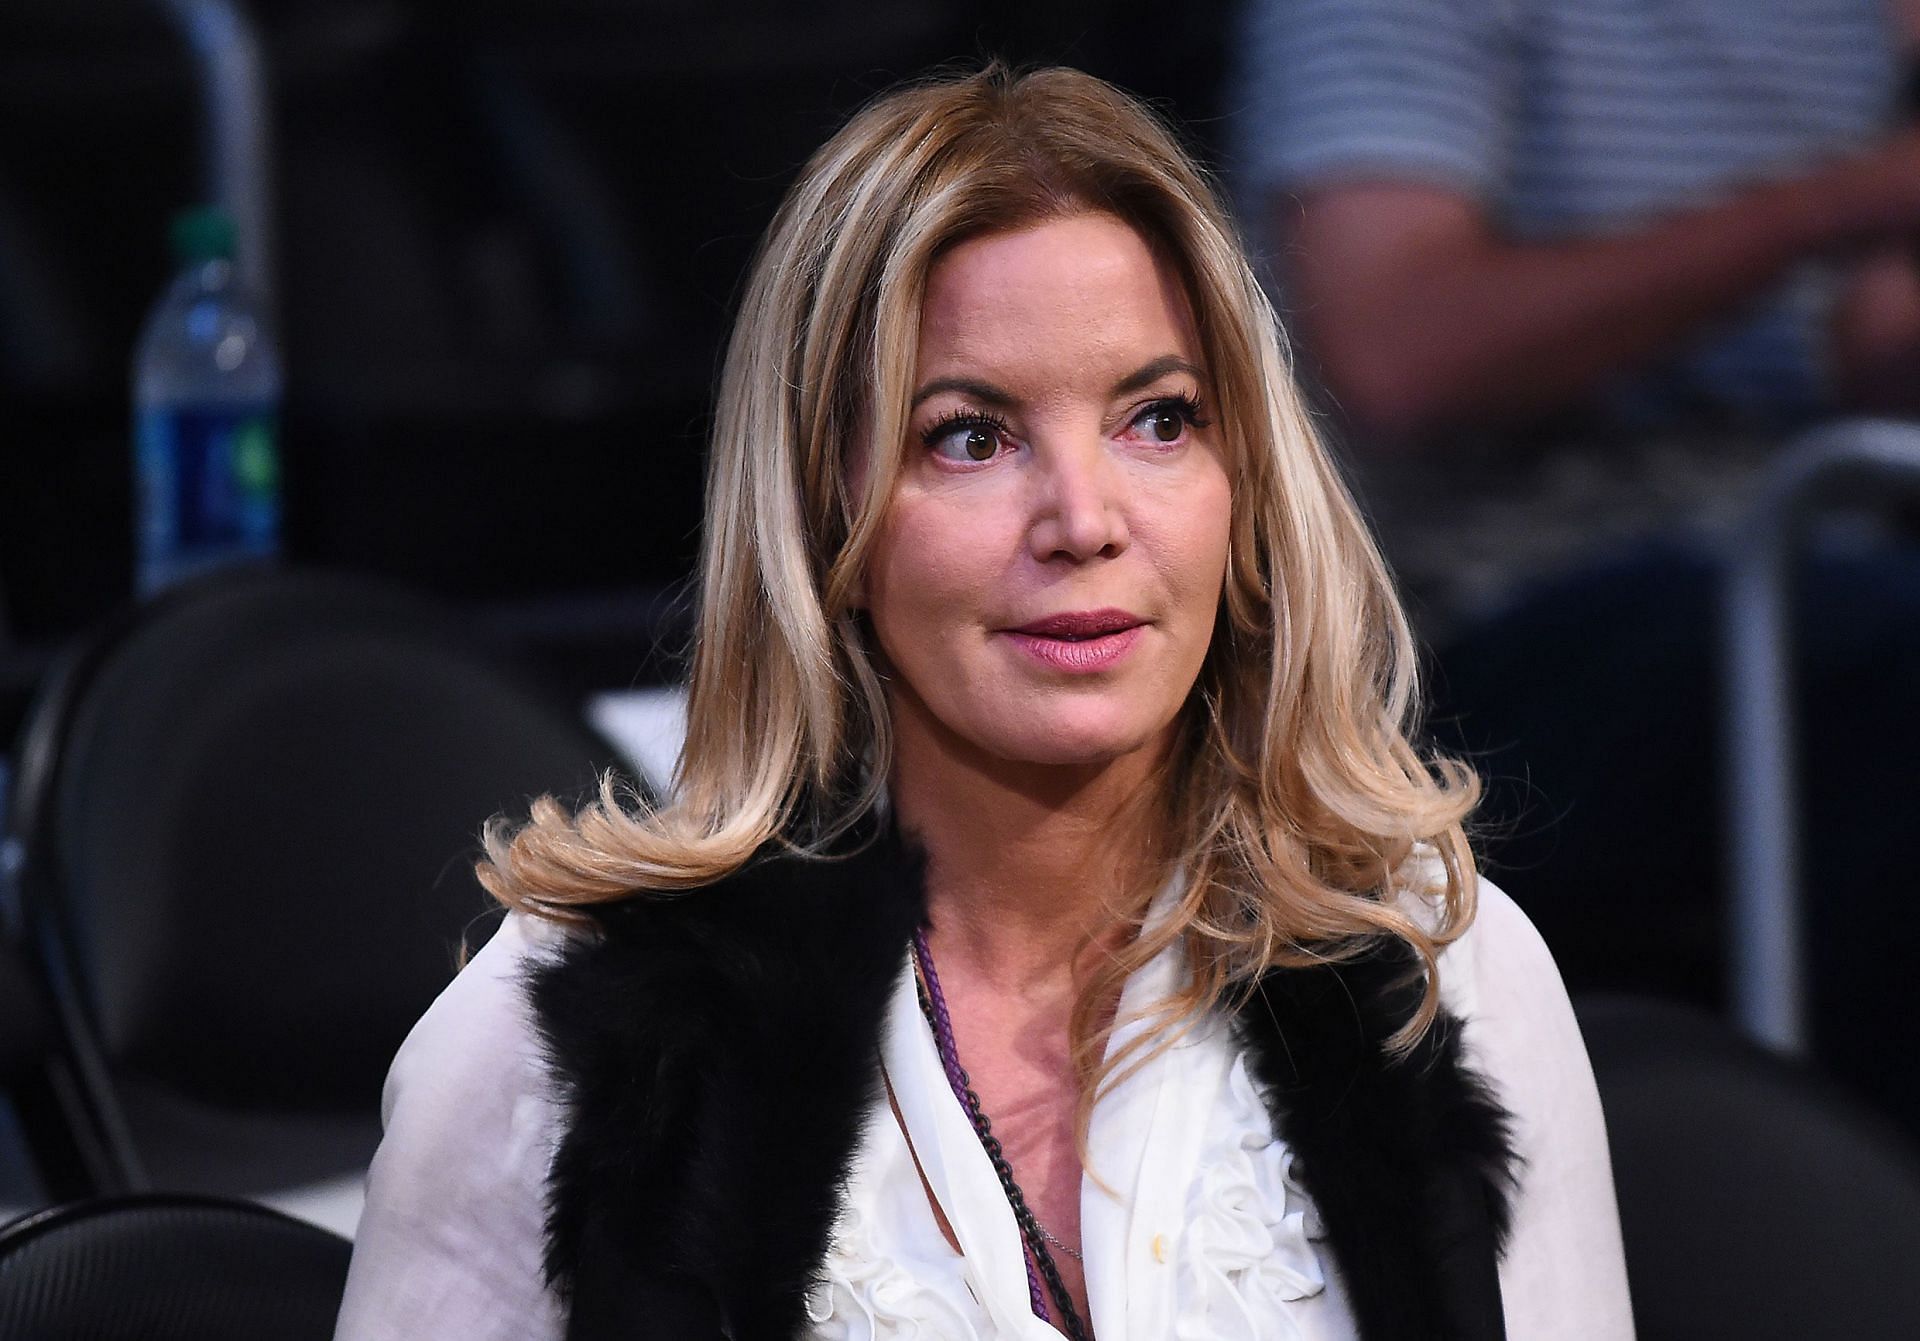 LA Lakers team owner Jeanie Buss hurriedly left